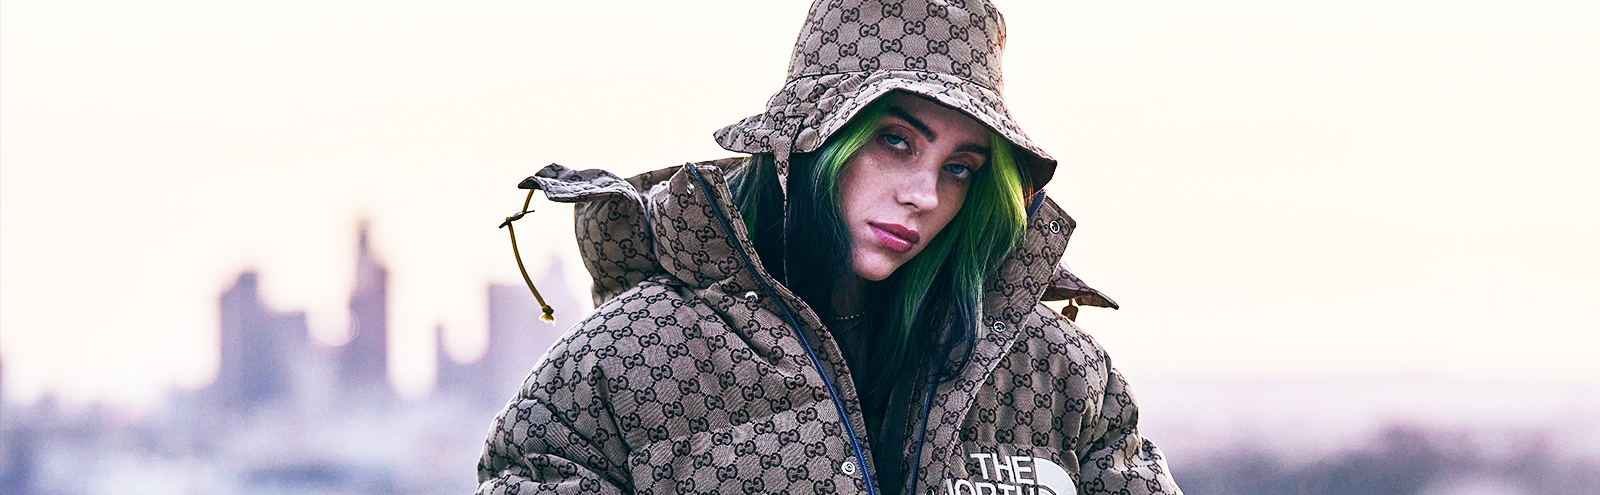 Billie Eilish's Gucci x The North Face Coat at Her Premiere